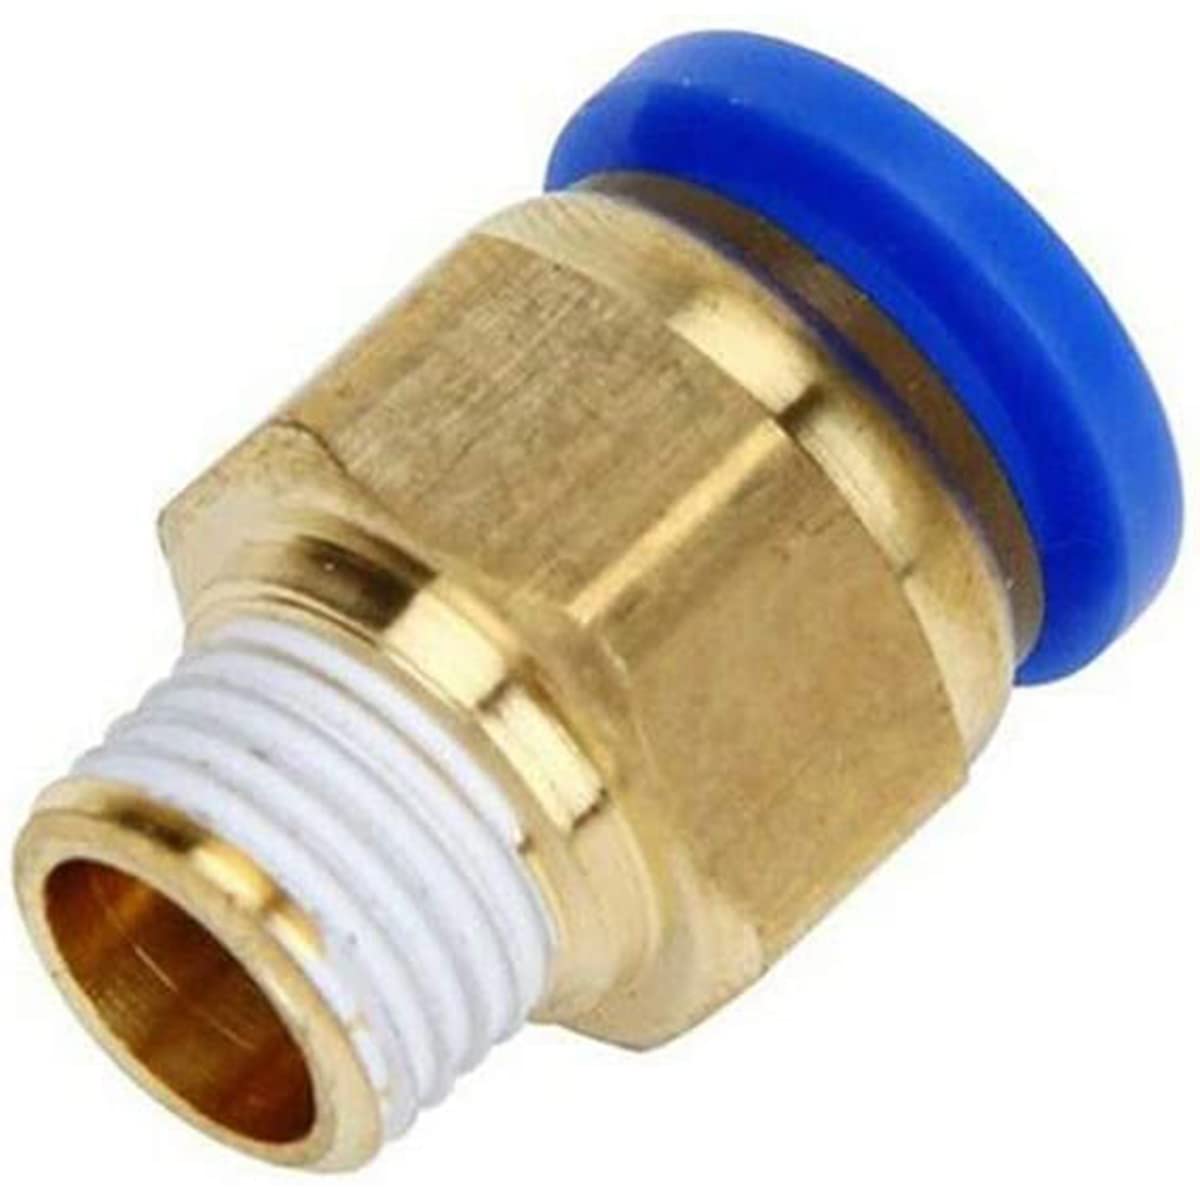 10 PCS Straight Pneumatic Push to Quick Connector Air Fittings Adapter 6mm Diameter Thread 1/4 BSP Set for Pipe Pneumatic Tools